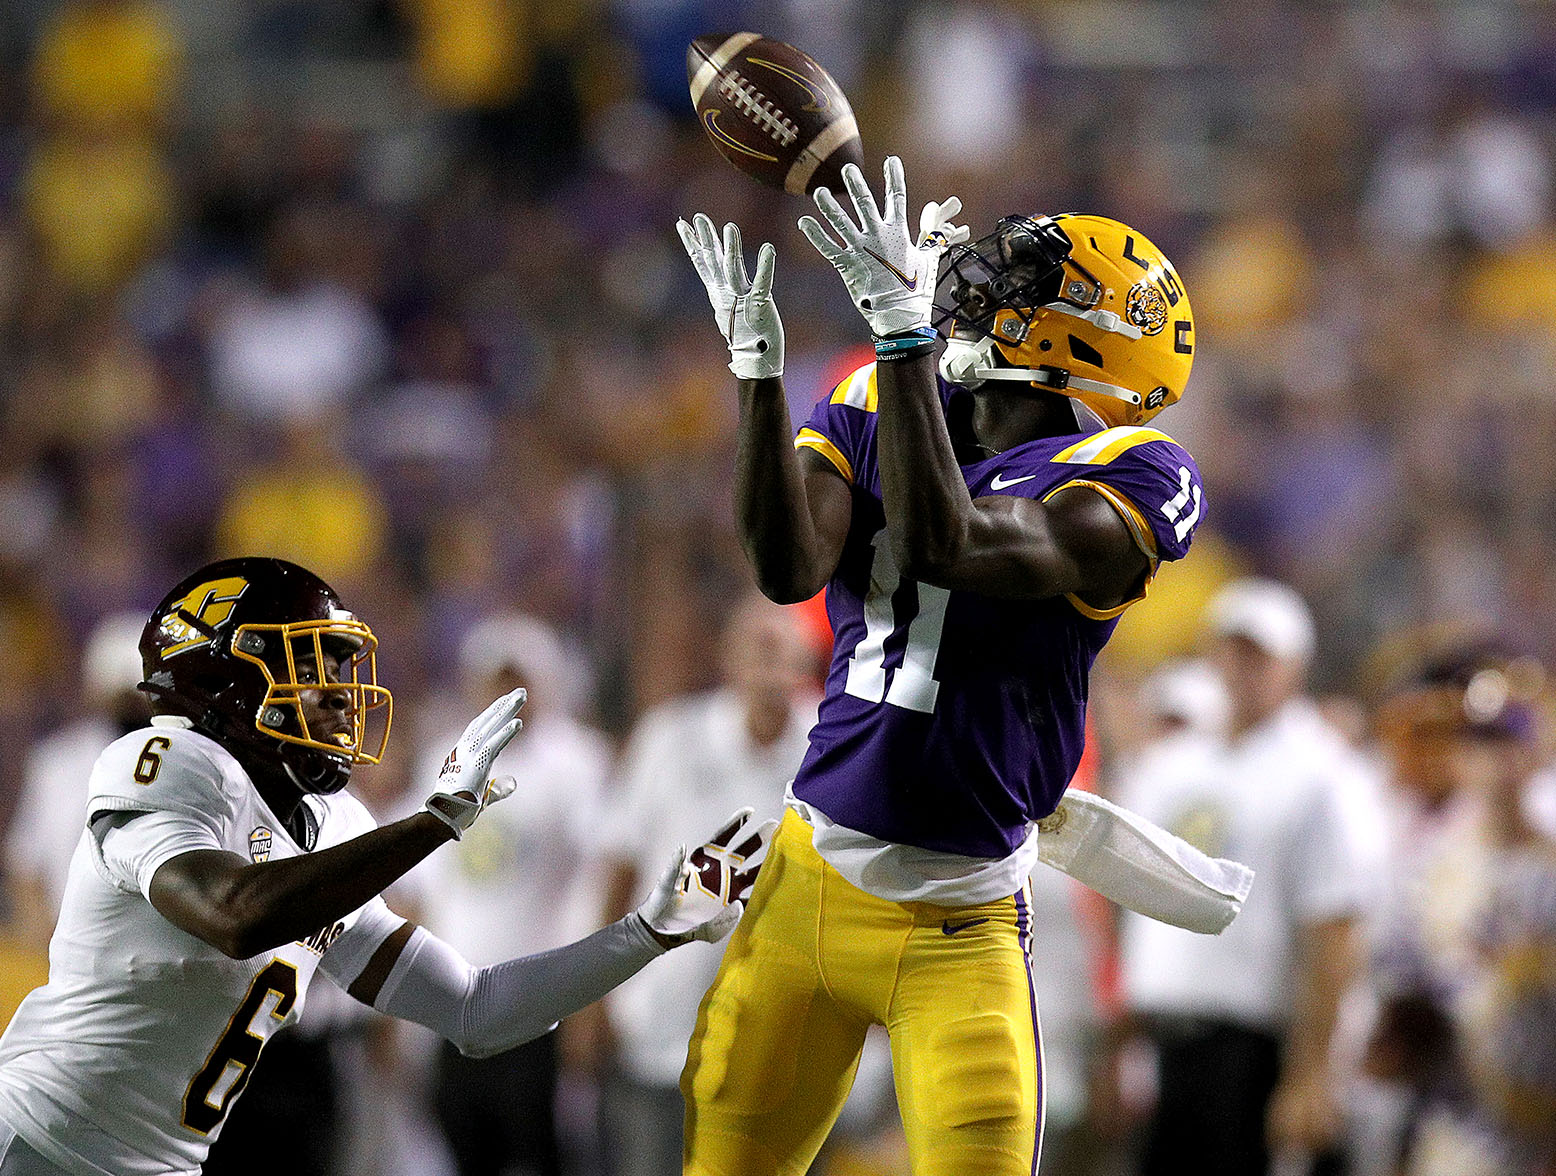 BATON ROUGE, LOUISIANA - SEPTEMBER 18: Brian Thomas Jr. #11 of the LSU Tigers catches a pass over Daedae Hill #6 of the Central Michigan Chippewas during the second quarter at Tiger Stadium on September 18, 2021 in Baton Rouge, Louisiana. (Photo by Sean Gardner/Getty Images)